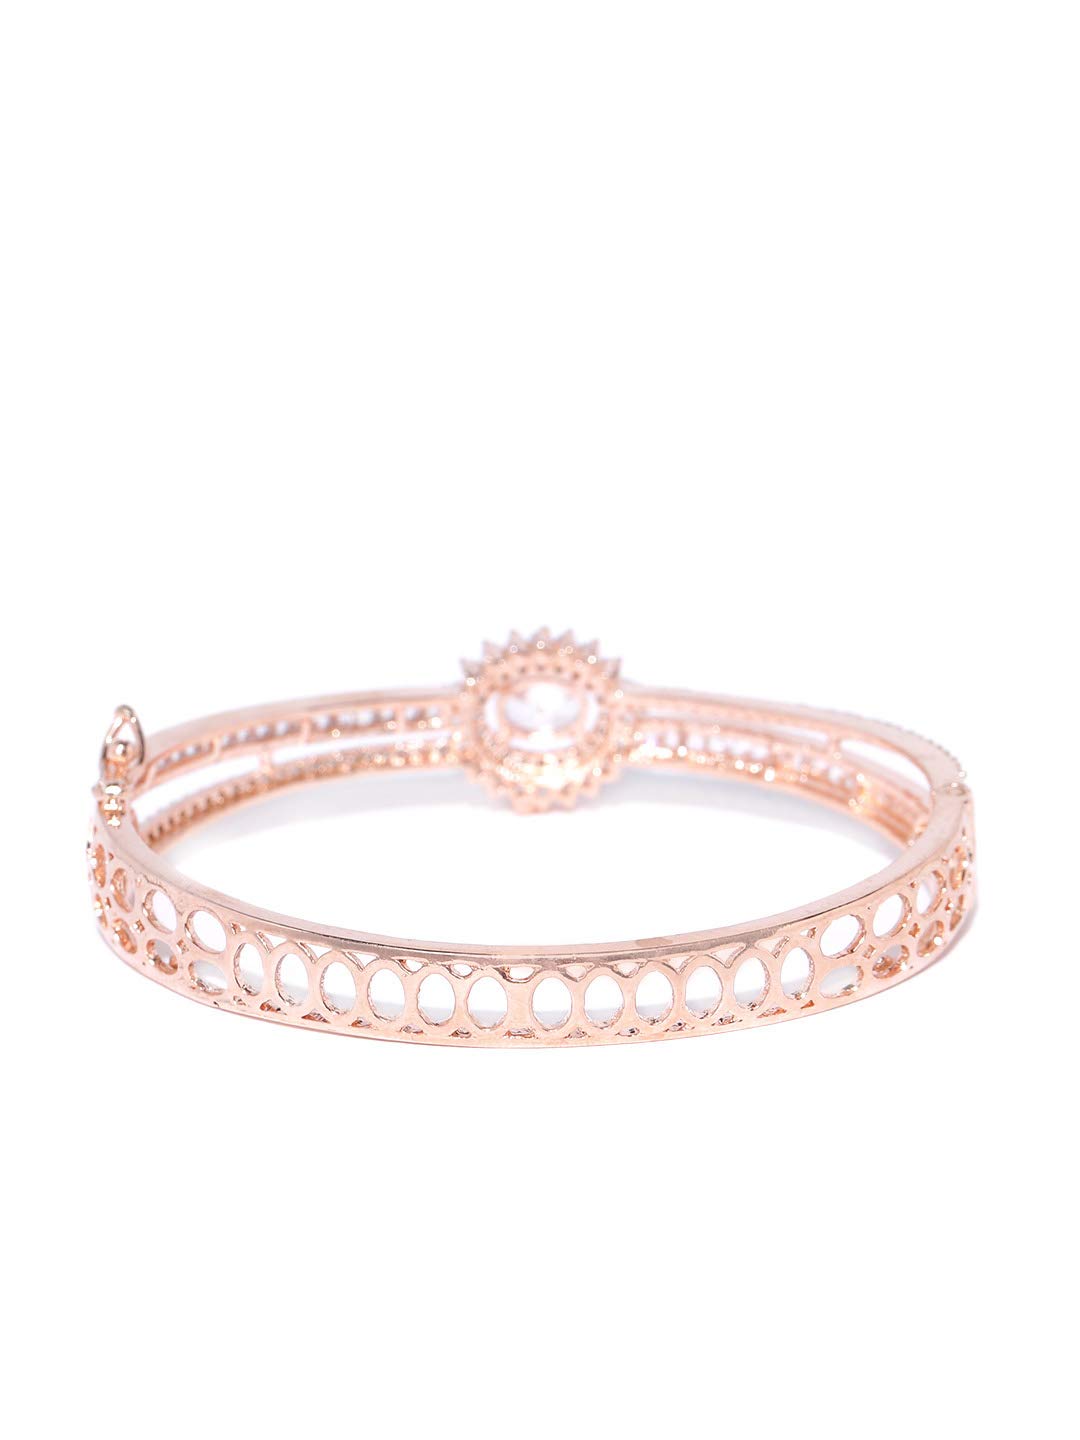 Priyaasi Floral Design American Diamond Bracelet for Women | Rose Gold-Plated | Bangle-Style Bracelet for Girls | Interlock Closure | Perfect for Weddings & Parties